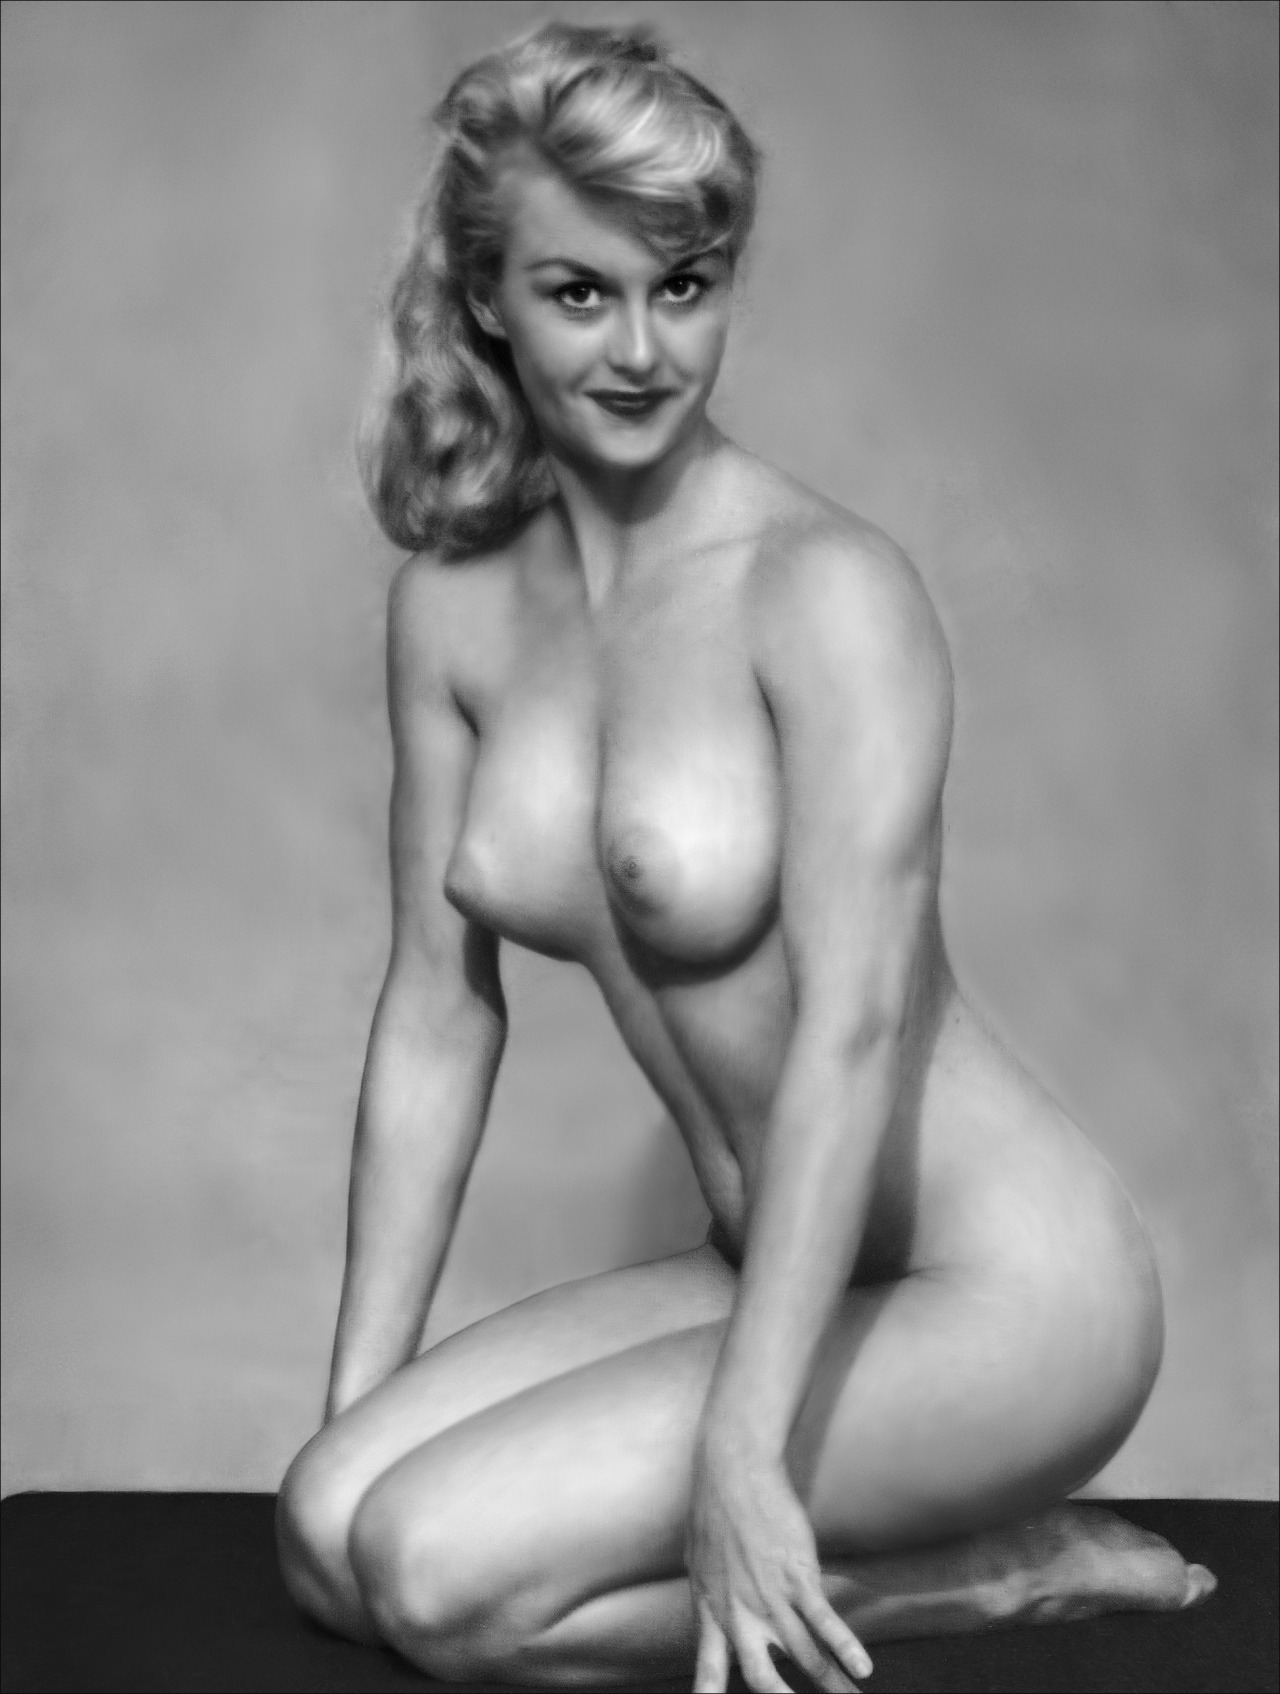 Retro Erotic Photography - Pinup style hotty porn pic. pinup style hotty po...